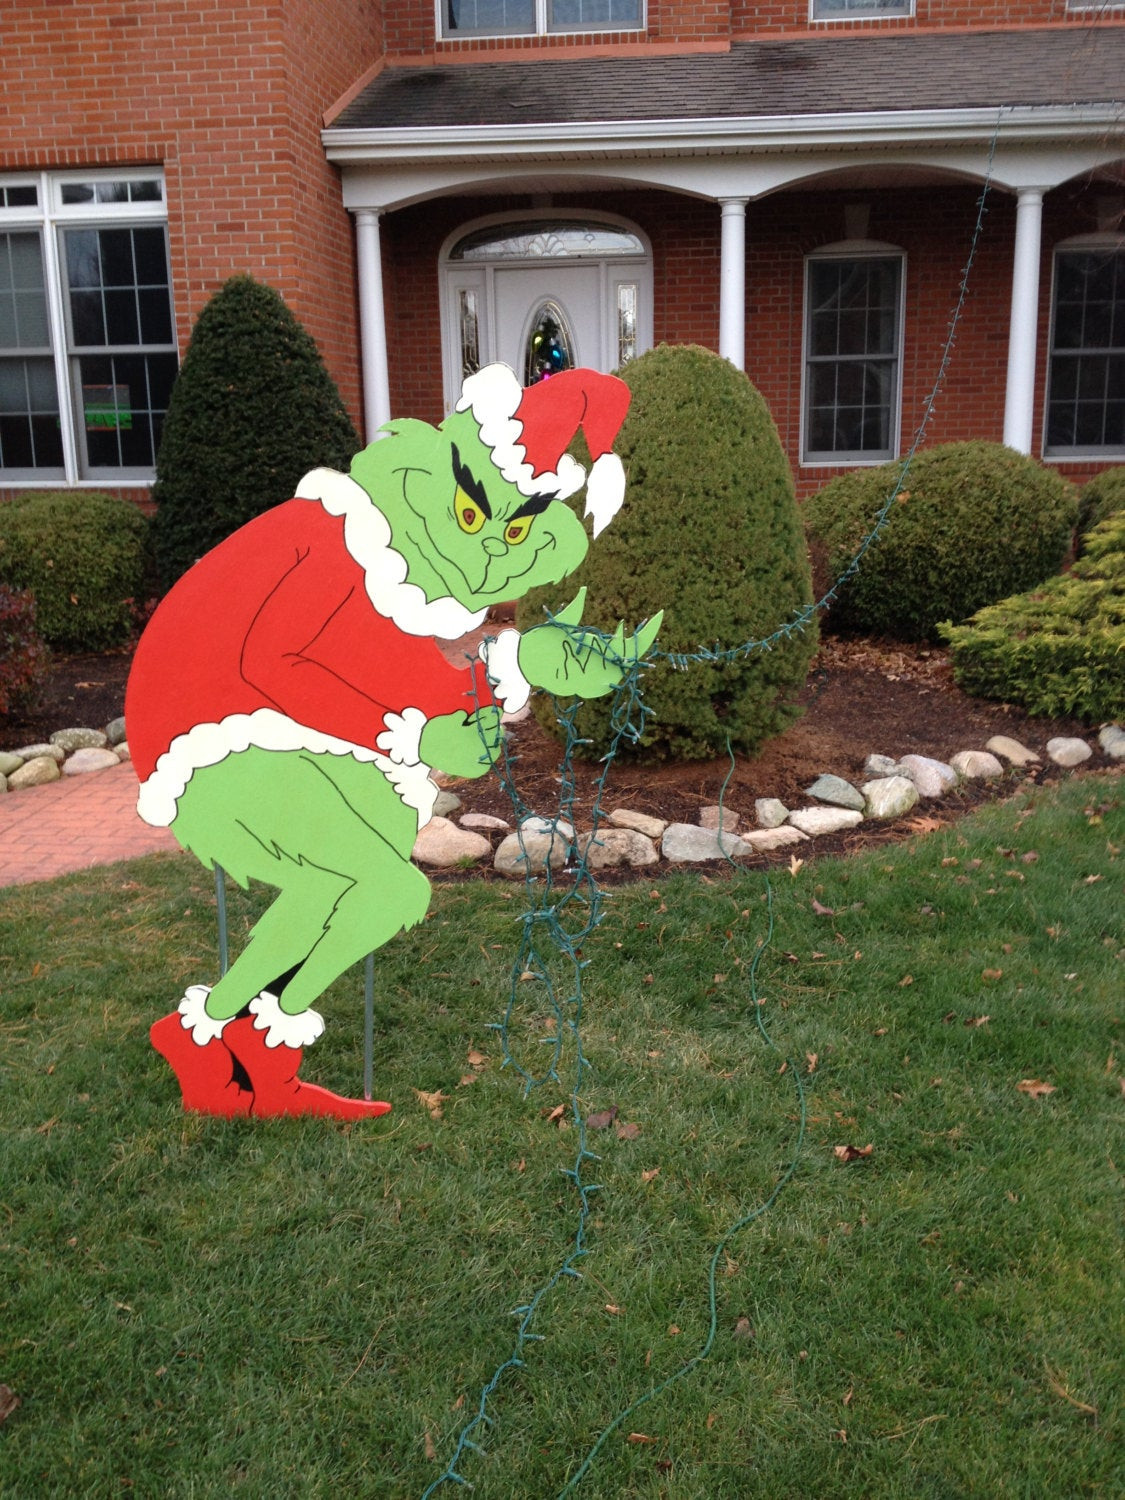 Grinch Christmas Lights Outdoor
 Grinch Stealing Christmas Lights Yard Art Decoration Grinch